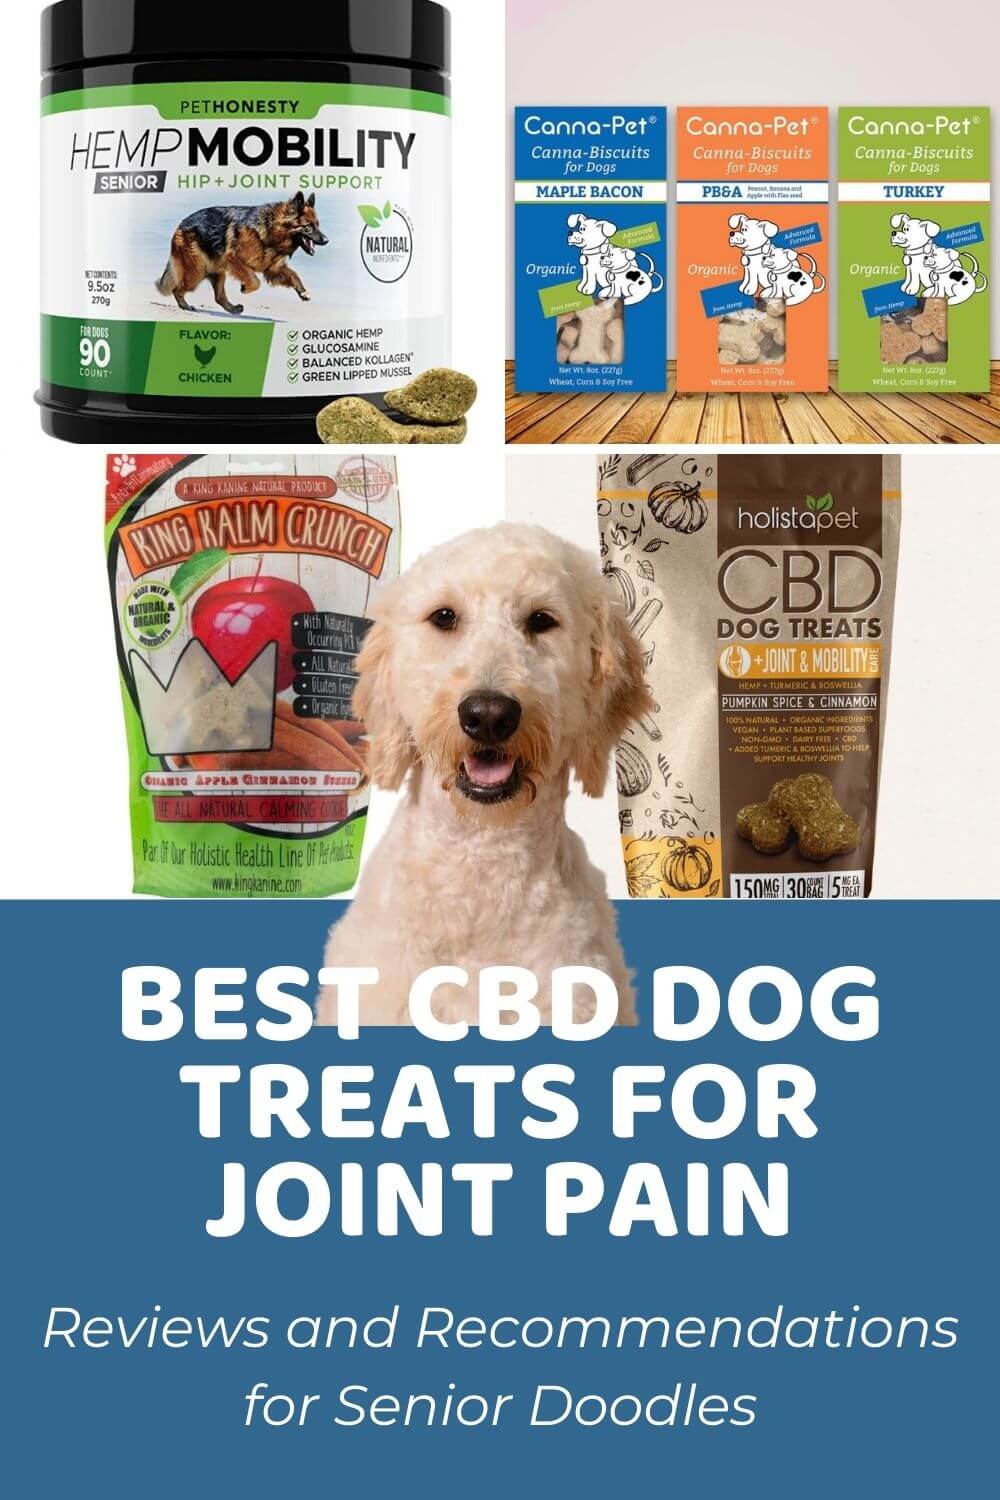 Best CBD Dog Treats for Joint Pain 